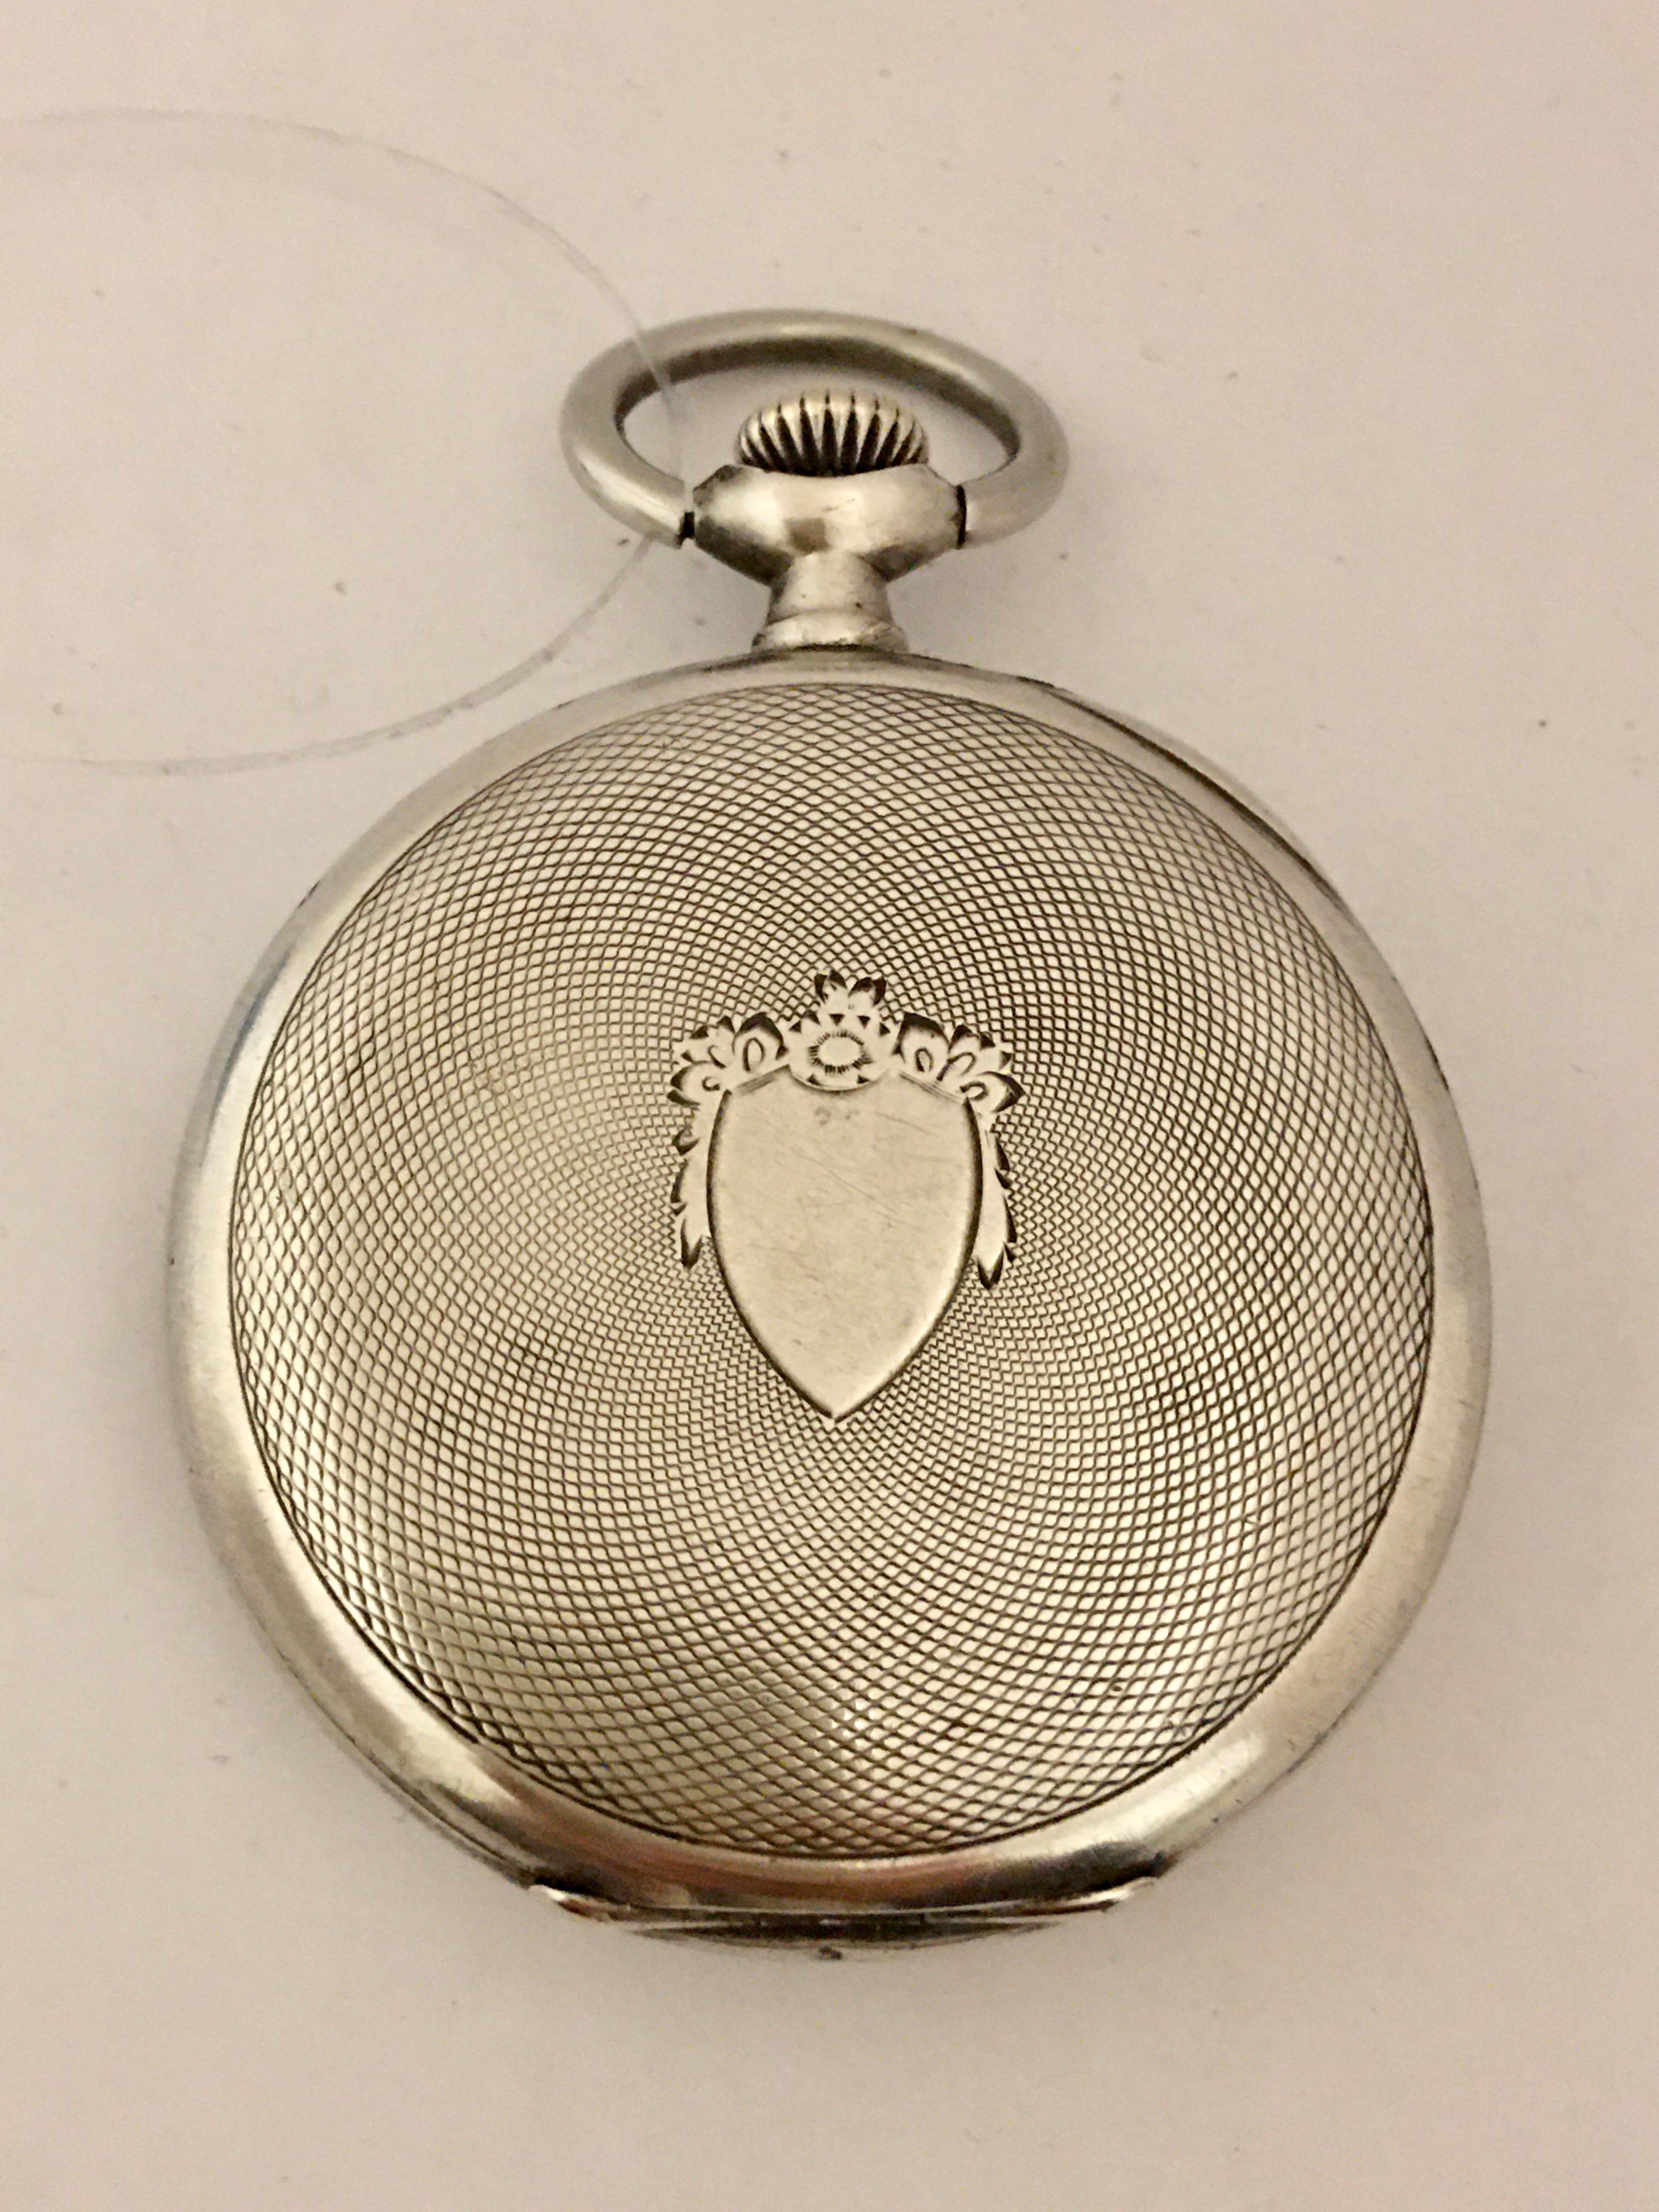 This Charming 49mm Antique Omega Silver Pocket Watch is working and it is ticking well. However due to its age I cannot guarantee its time accuracy ( it runs 10mins fast a day) Visible signs of wearing on the silver case, some tiny dents on the back